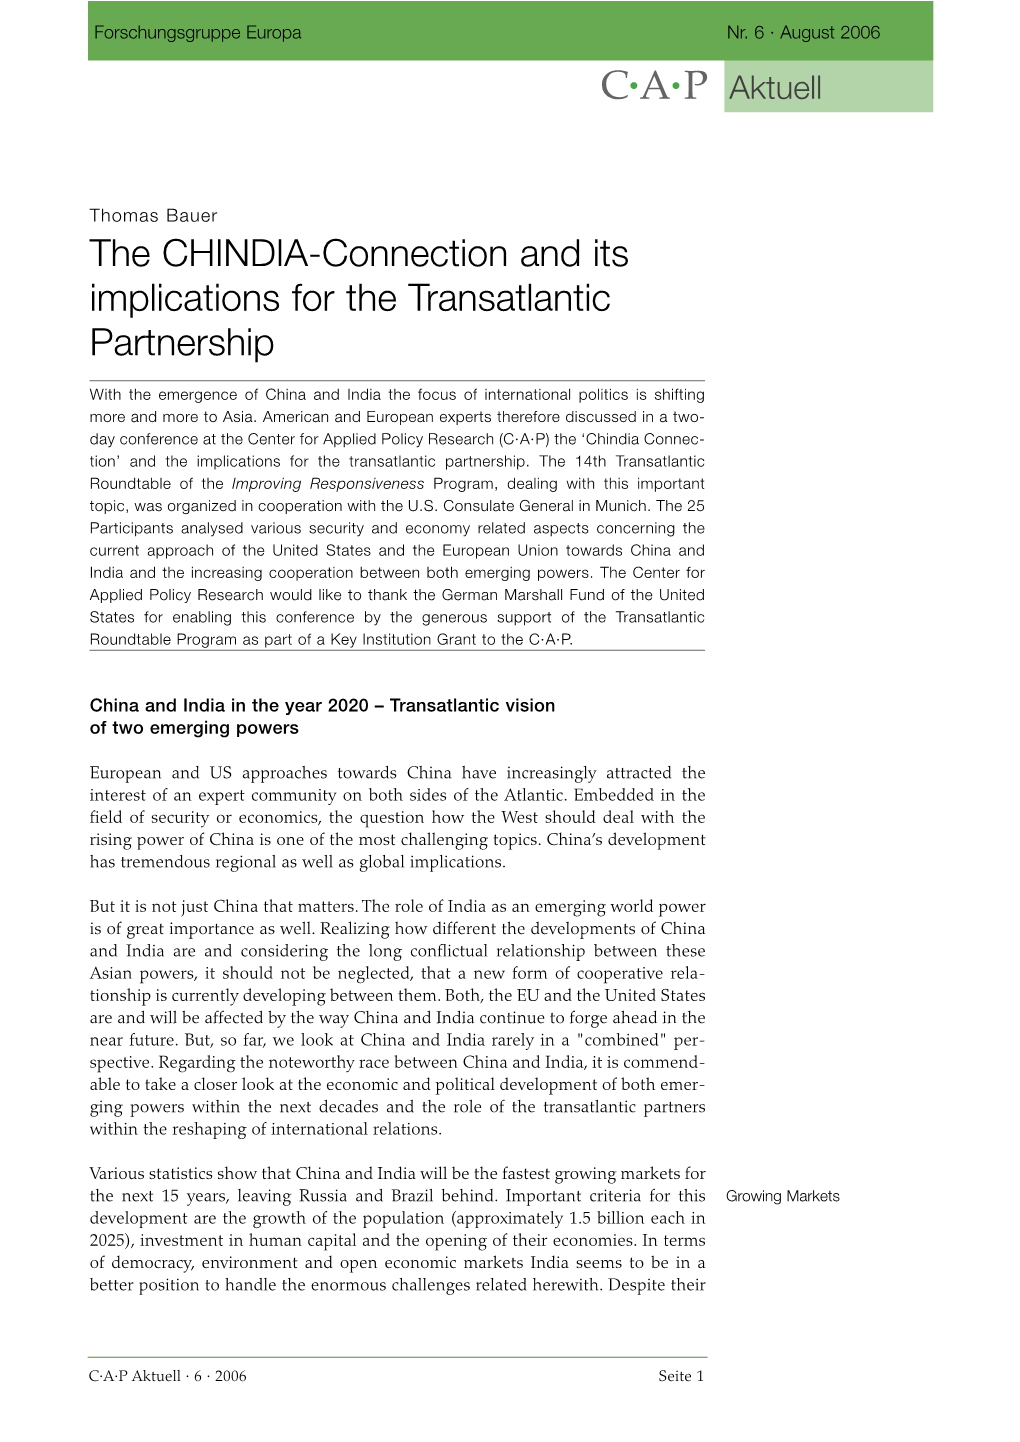 The CHINDIA-Connection and Its Implications for the Transatlantic Partnership